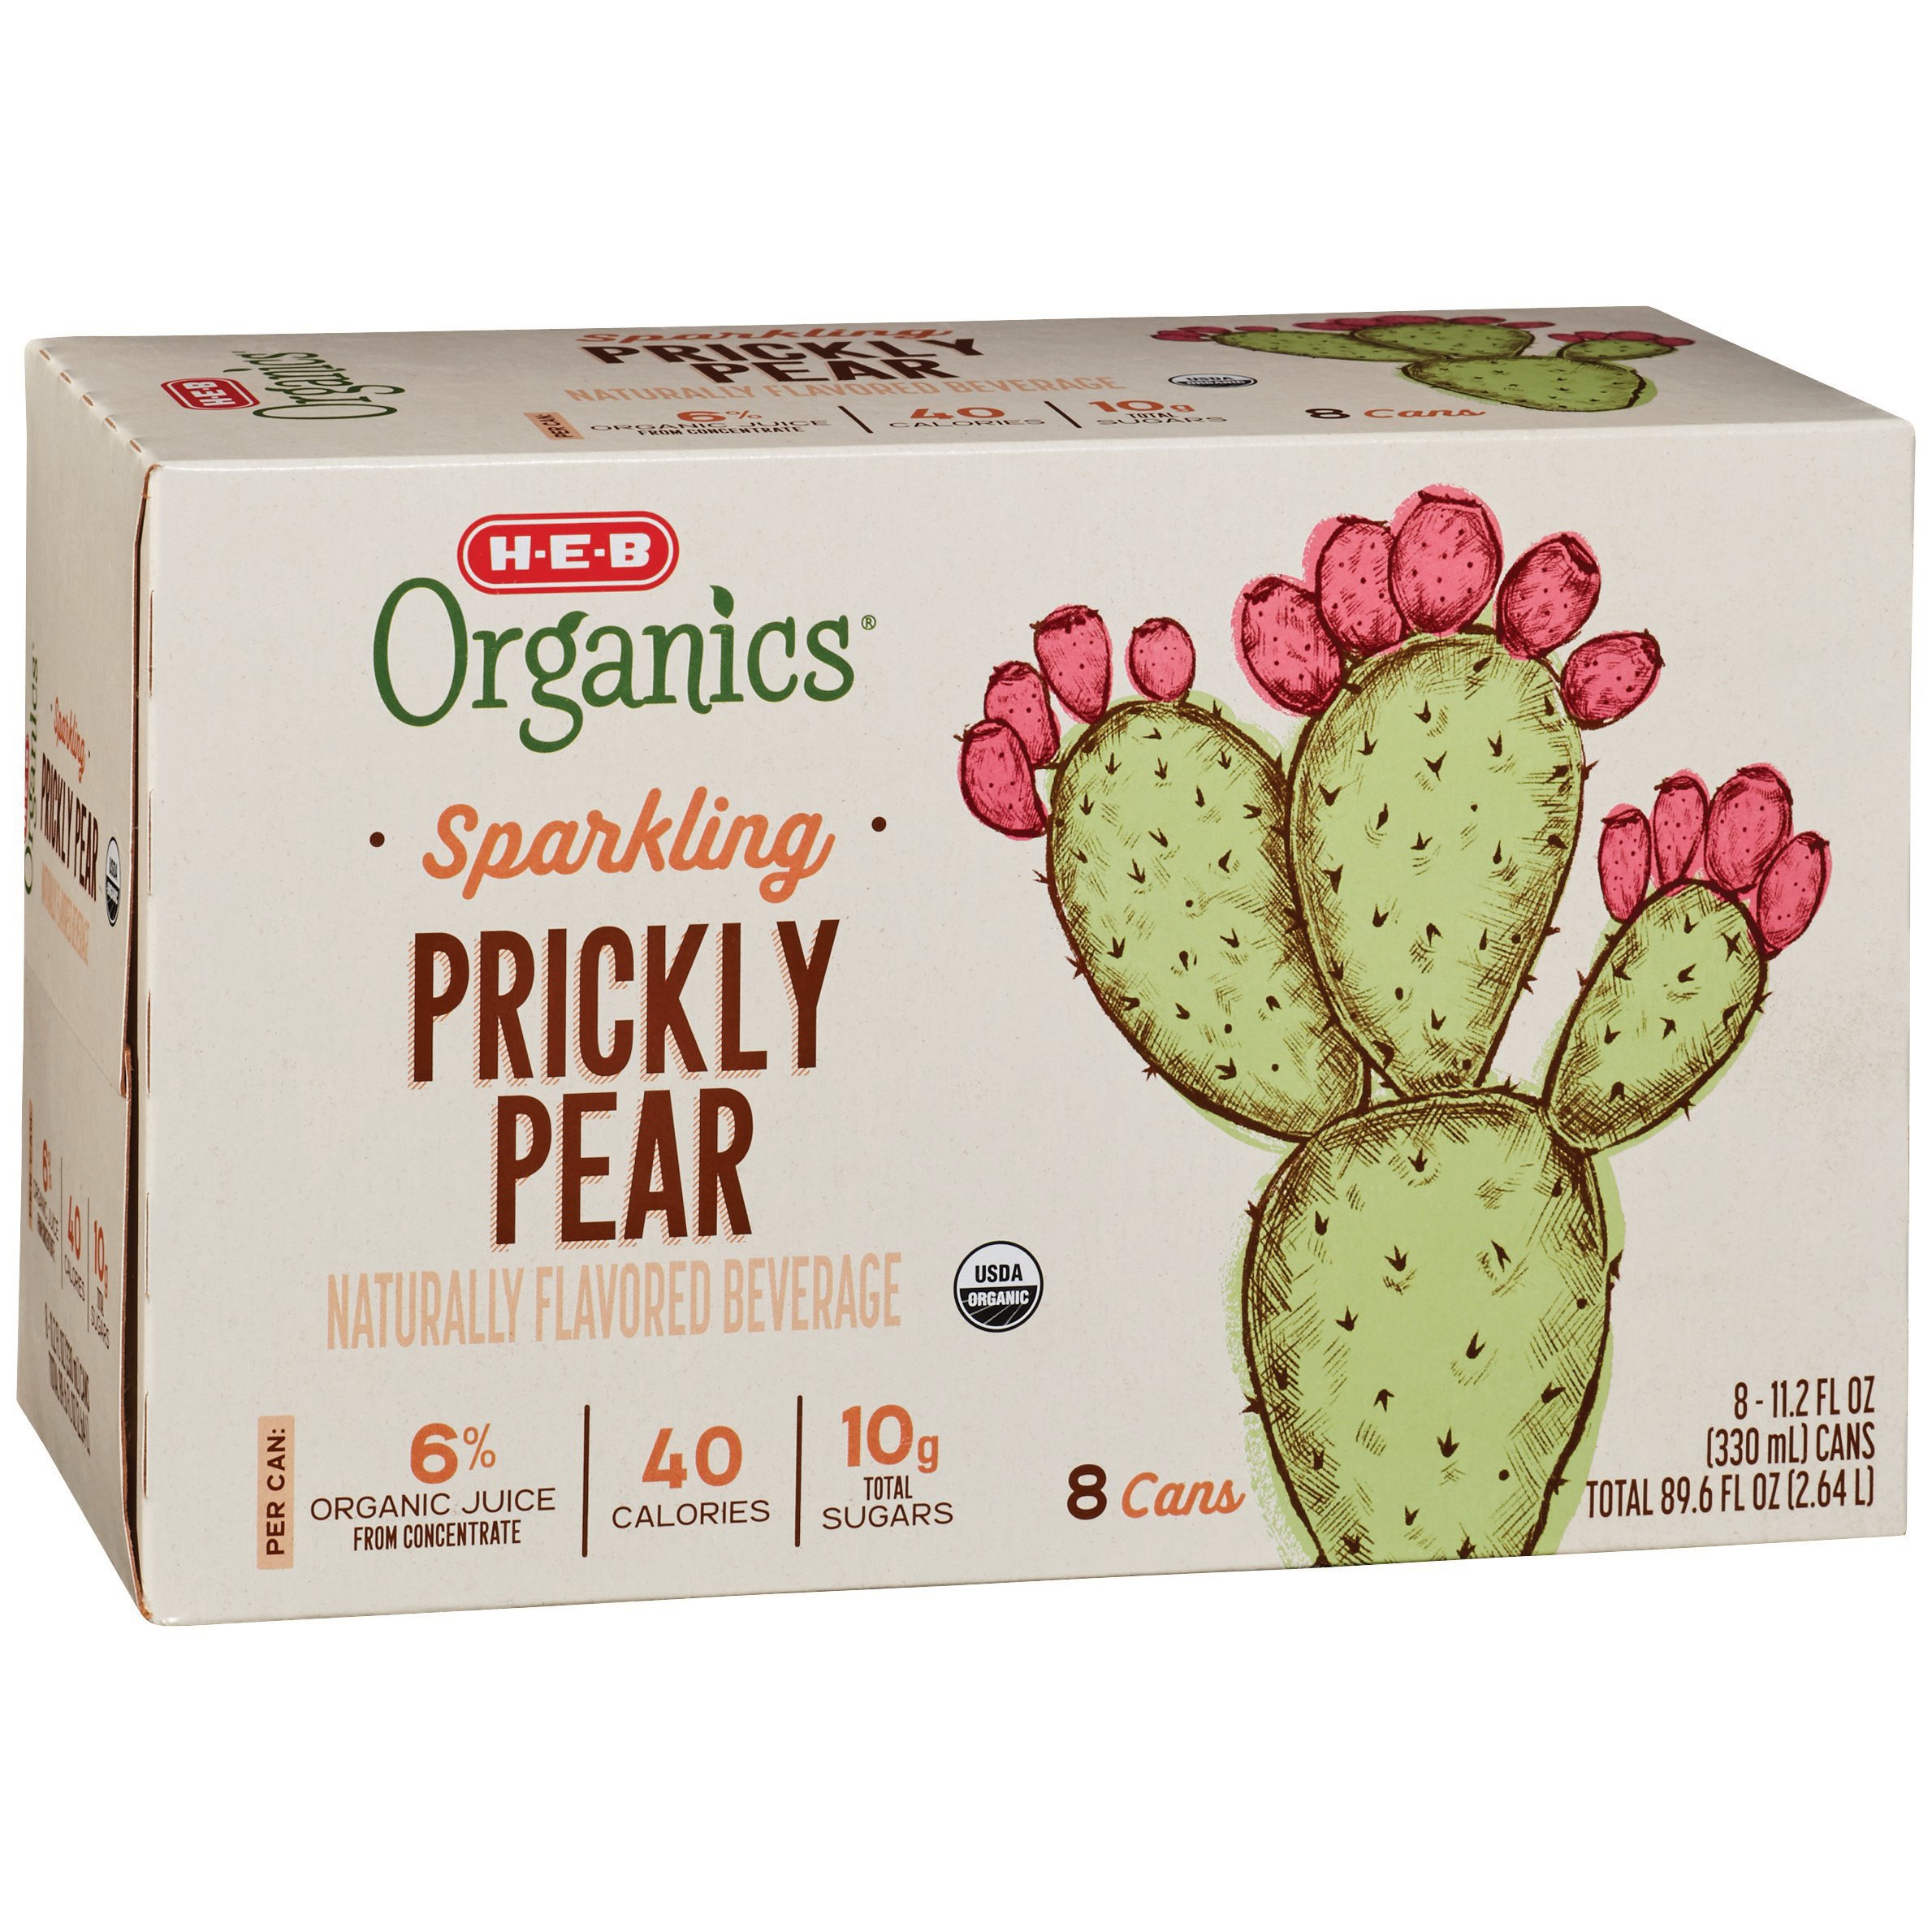 H E B Organics Sparkling Prickly Pear Beverage 11 2 Oz Cans Shop Water At H E B,What Do Cats Like To Look At